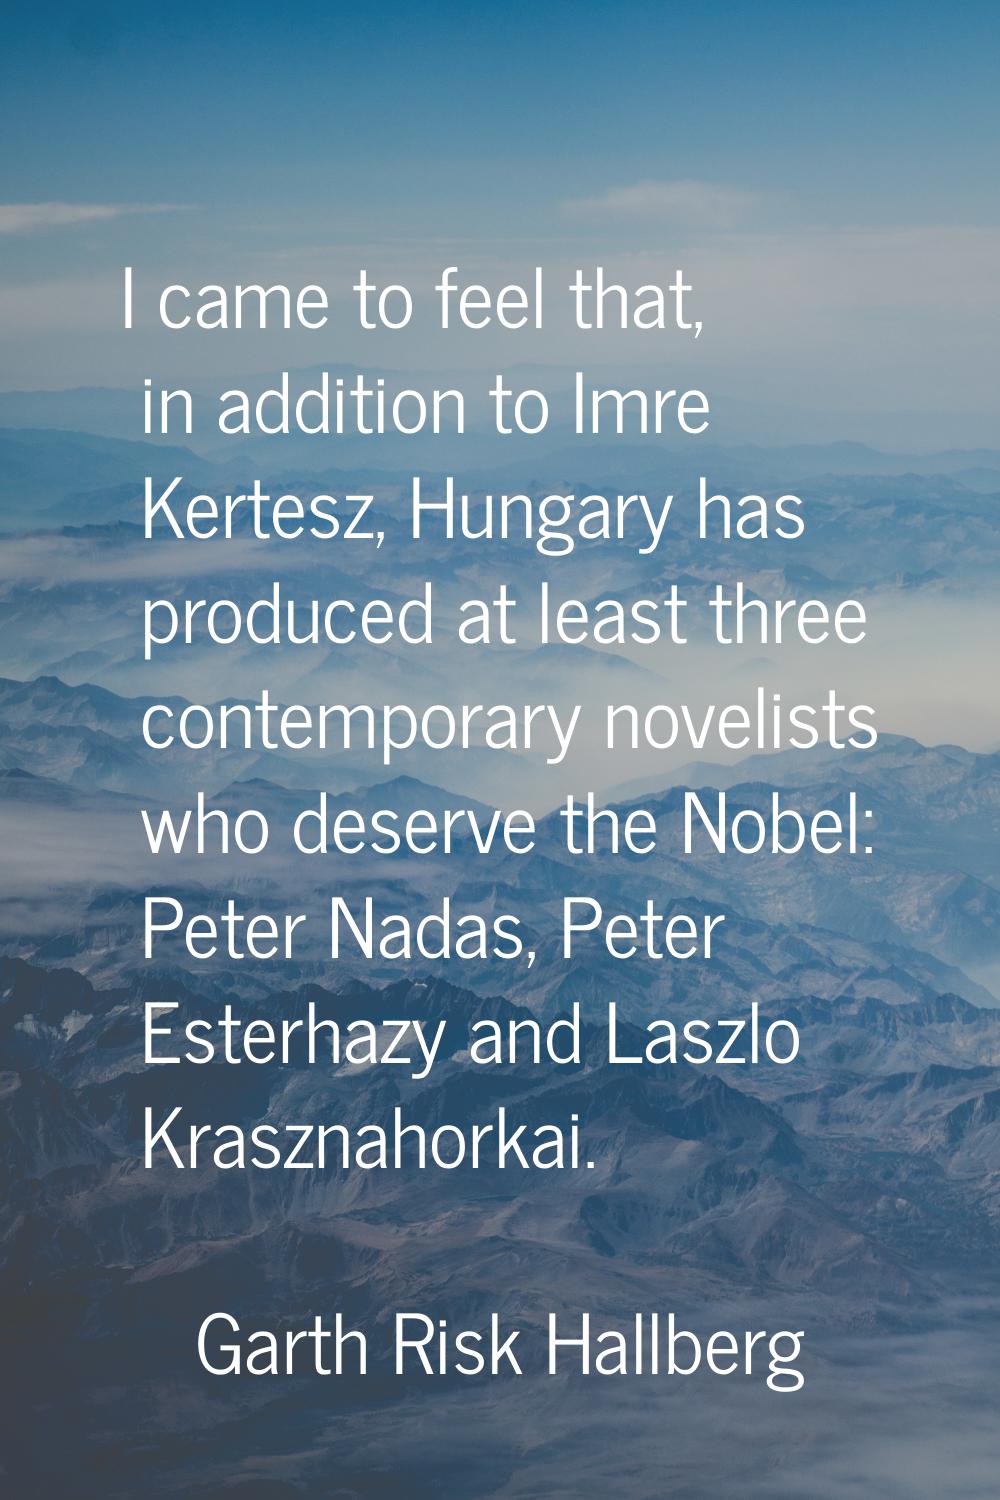 I came to feel that, in addition to Imre Kertesz, Hungary has produced at least three contemporary 